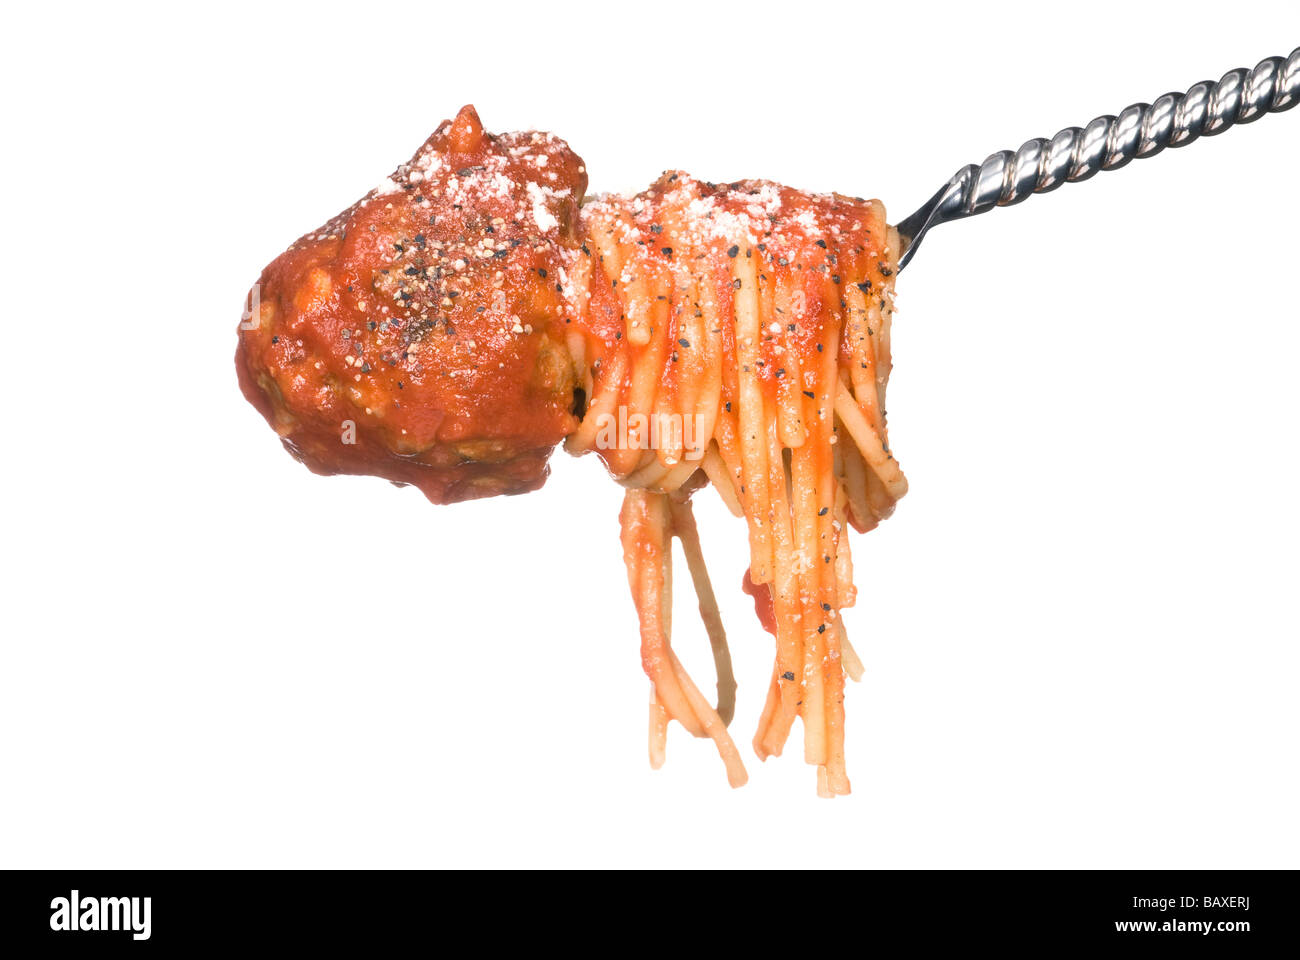 A fork with rolled spaghetti noodles and a delicious meatball ready to be consumed Stock Photo